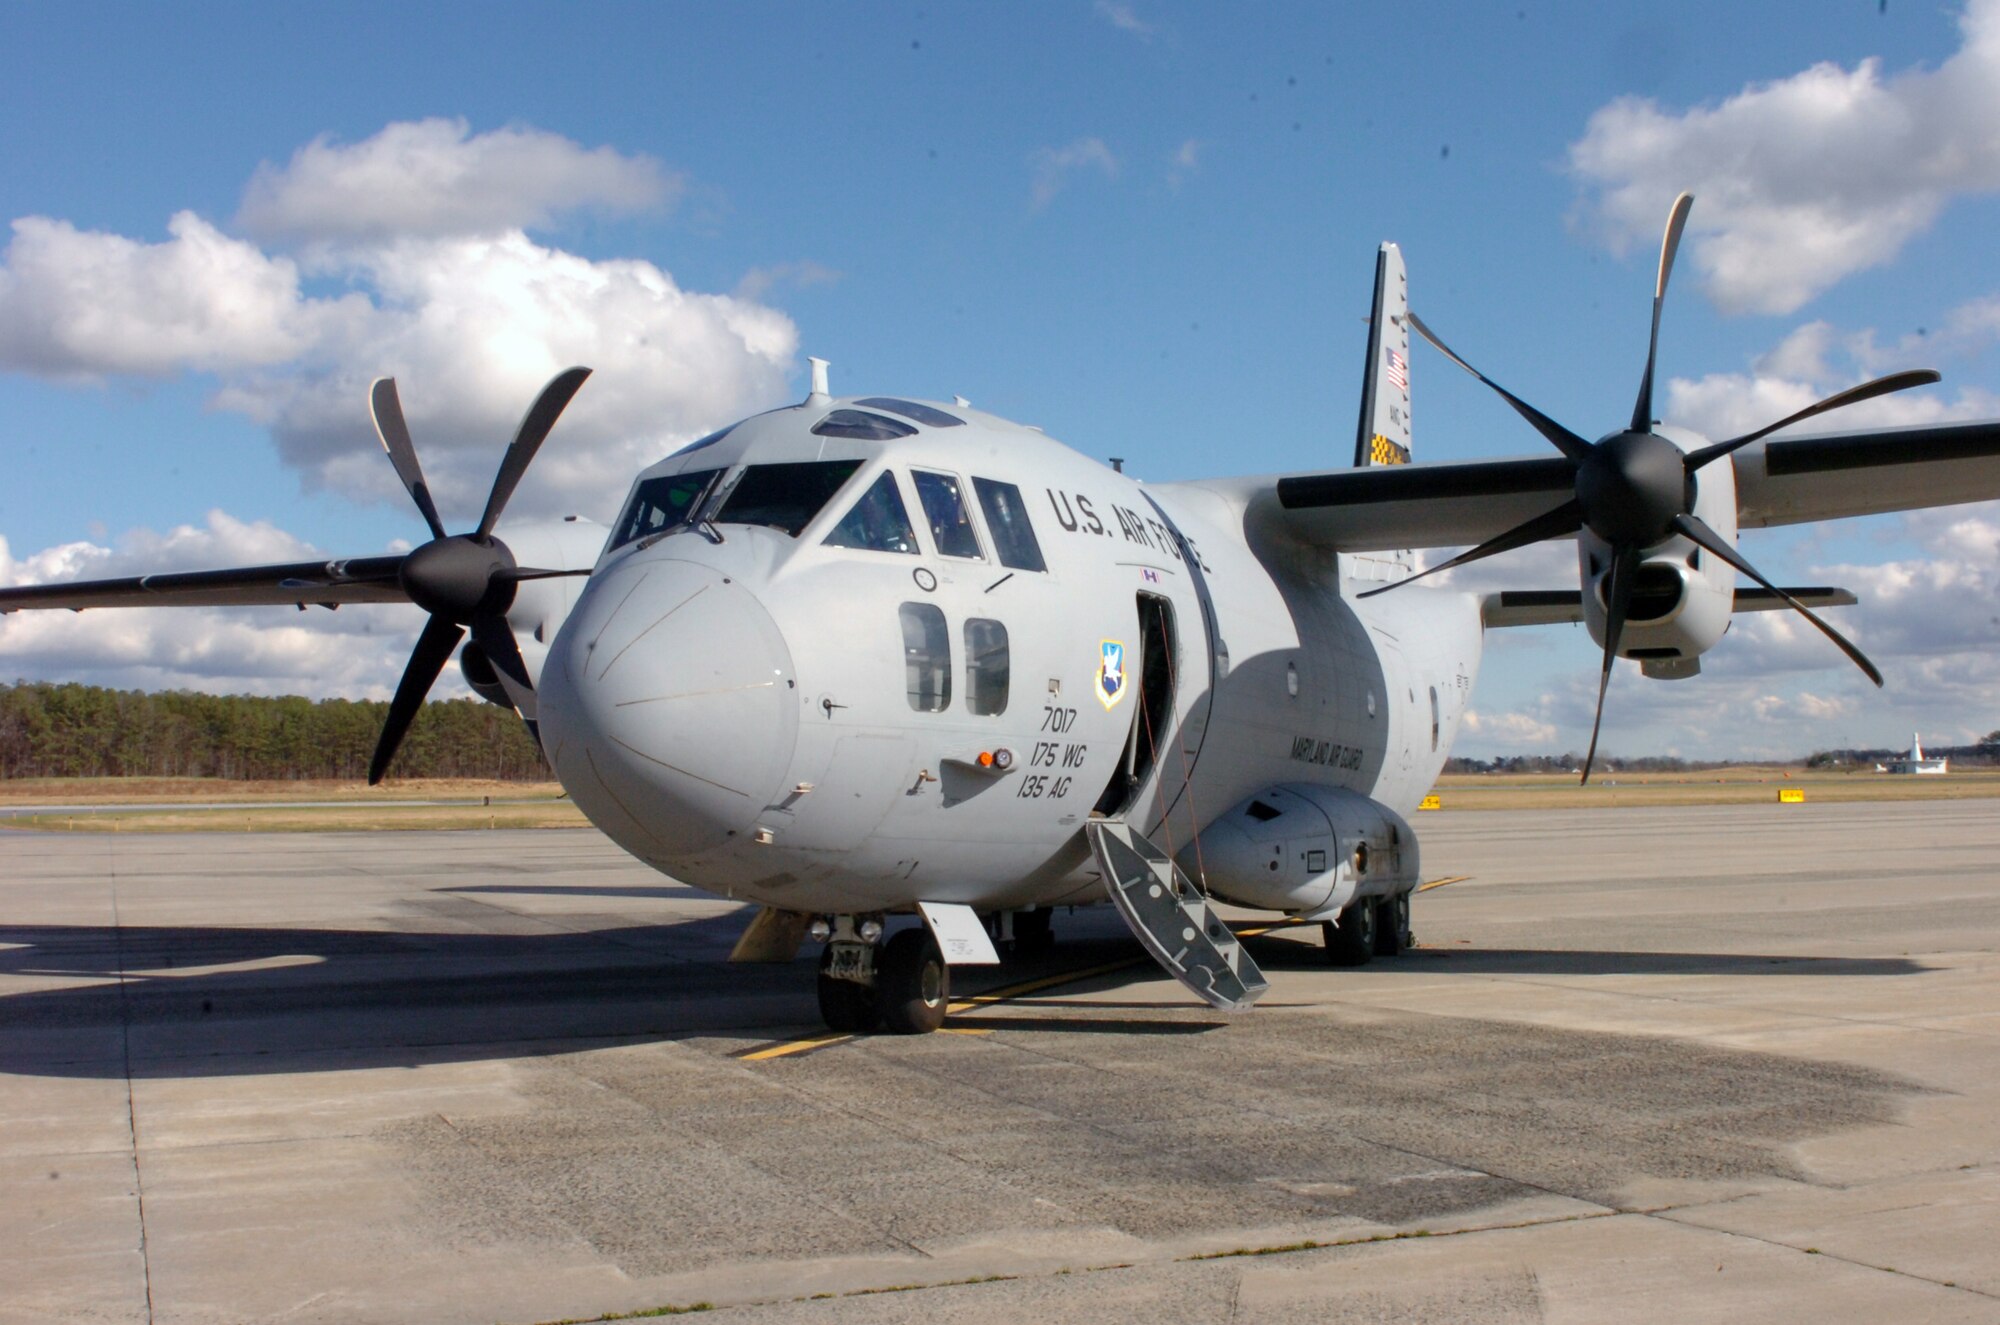 The Maryland Air National Guard performed a tactical training mission and conducted a static display of the C-27J ‘Spartan’ at the Wicomico Regional Airport in Salisbury, Md. Nov. 30. (National Guard Photo By 2nd Lt. Jessica Donnelly/RELEASED)
